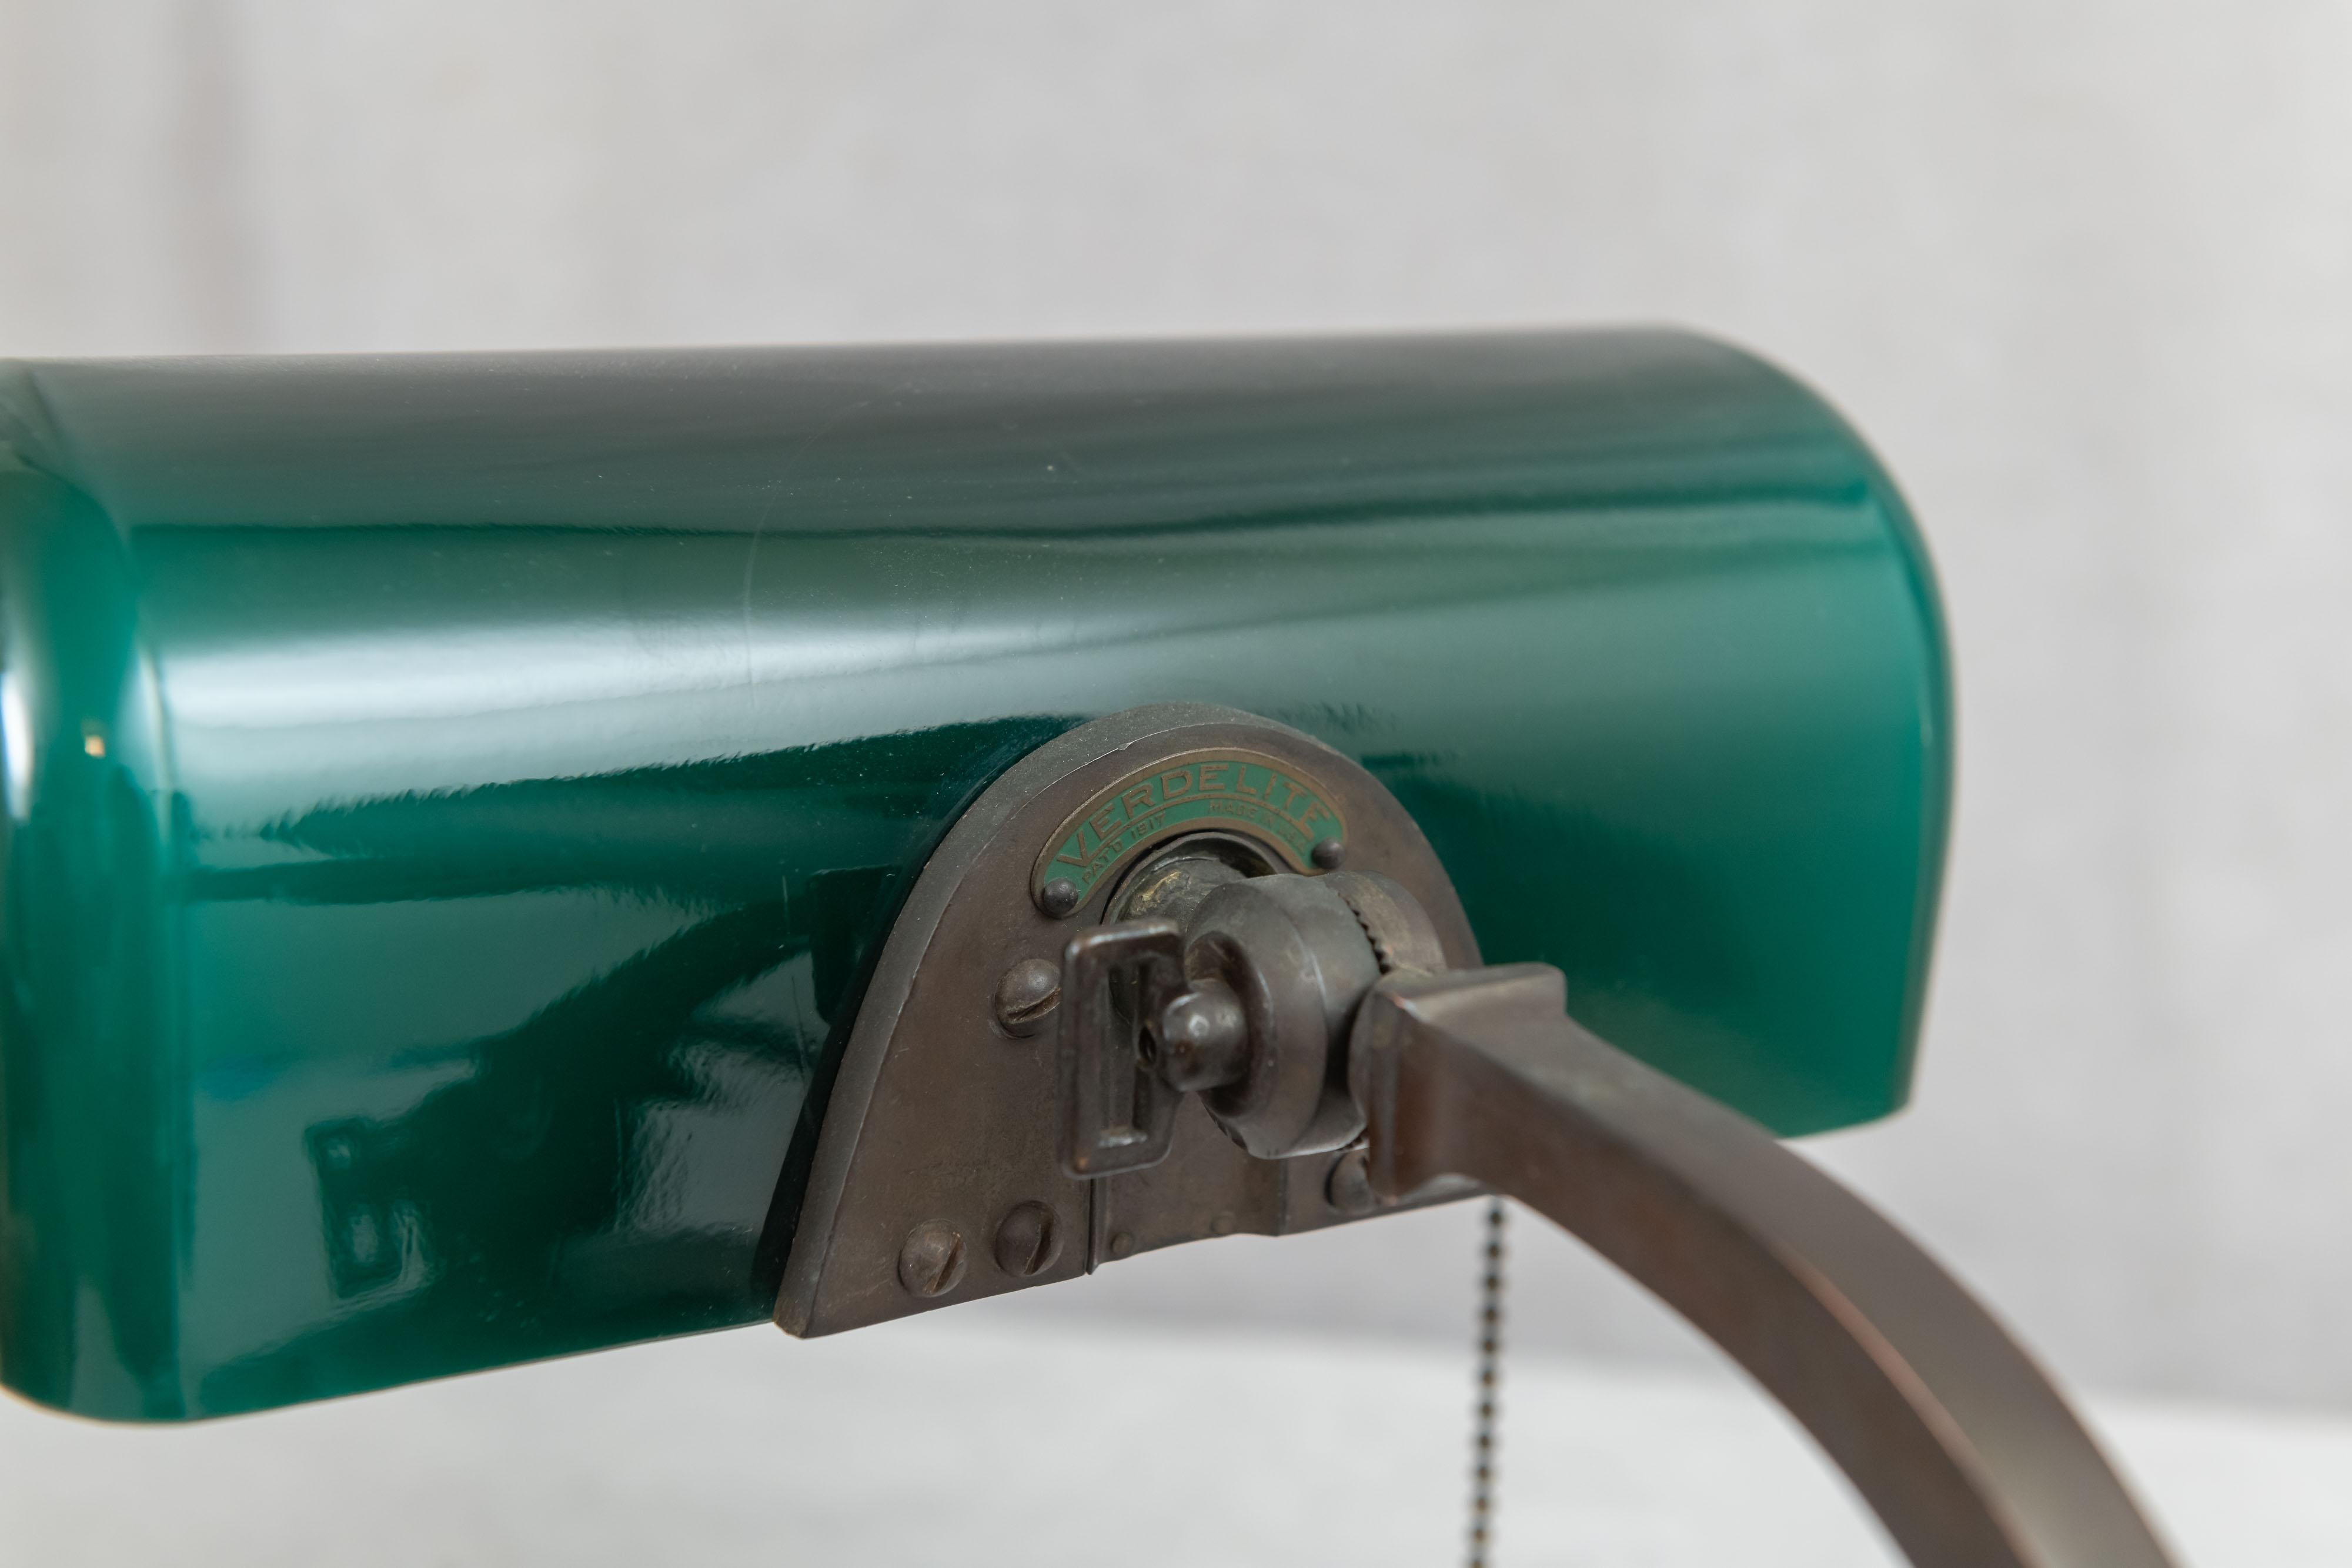 Early 20th Century Green Shade Banker's Desk Lamp by Verdelite, ca. 1918